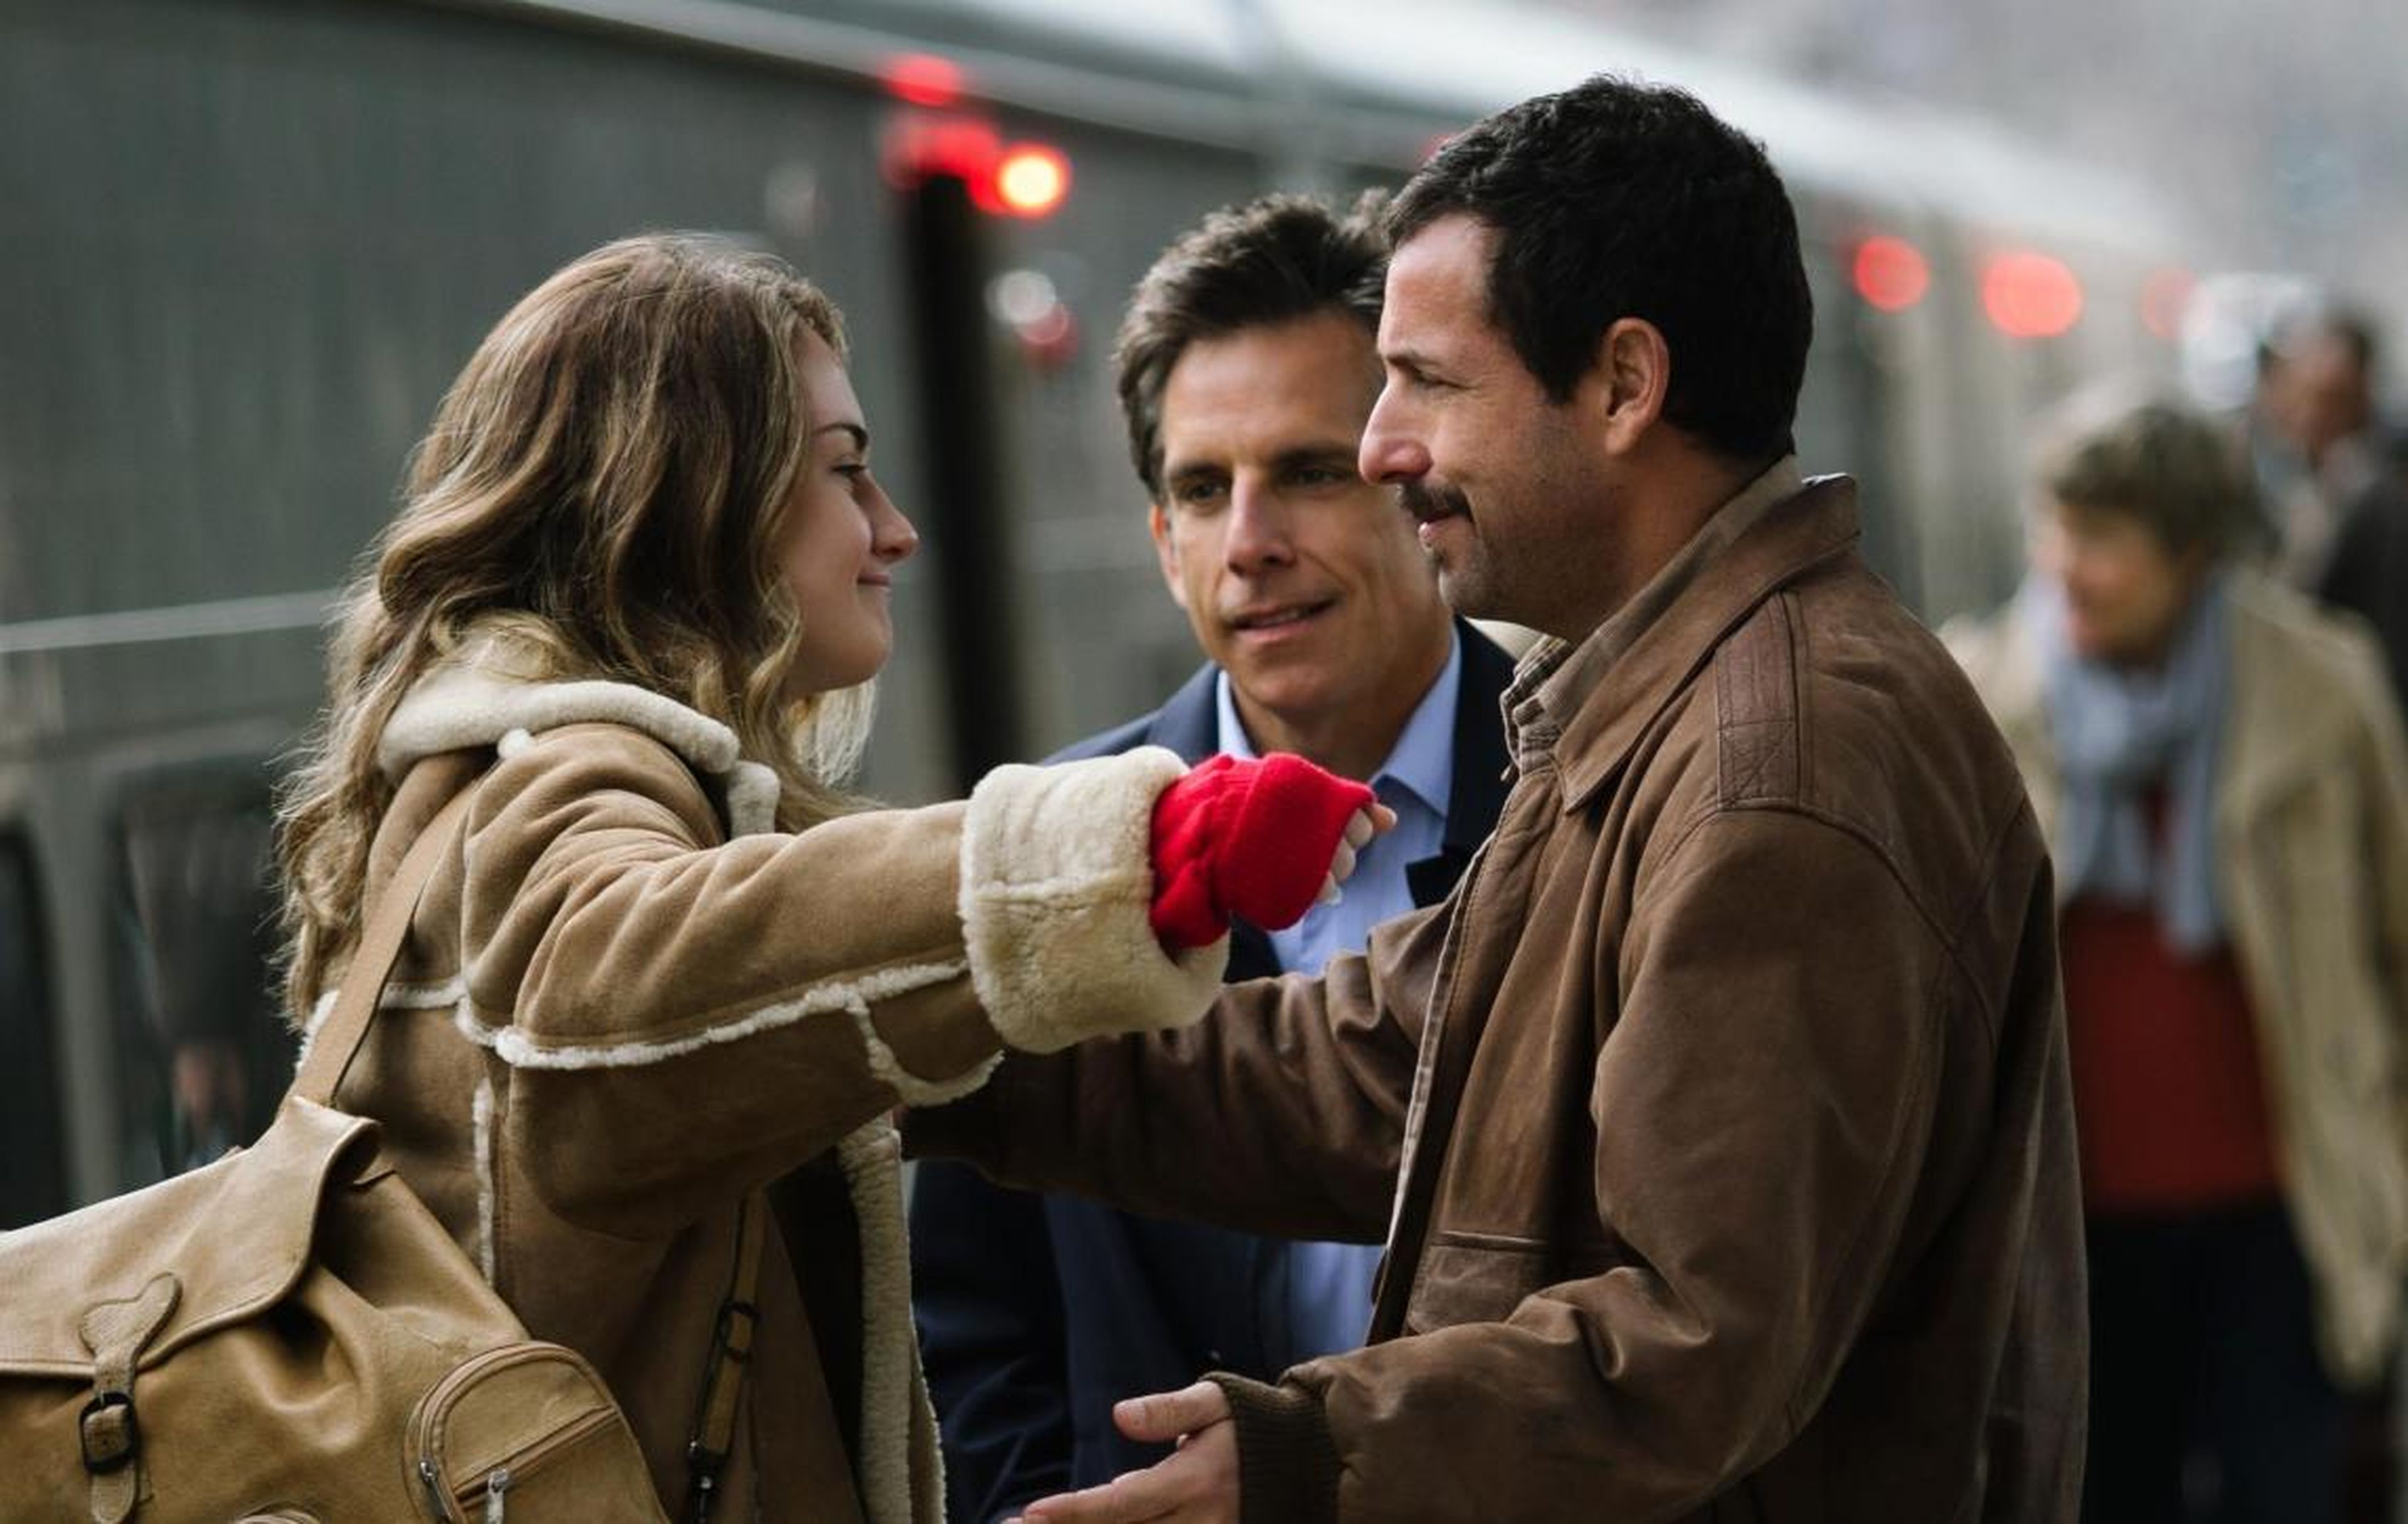 12. The Meyerowitz Stories (New and Selected) — 92%